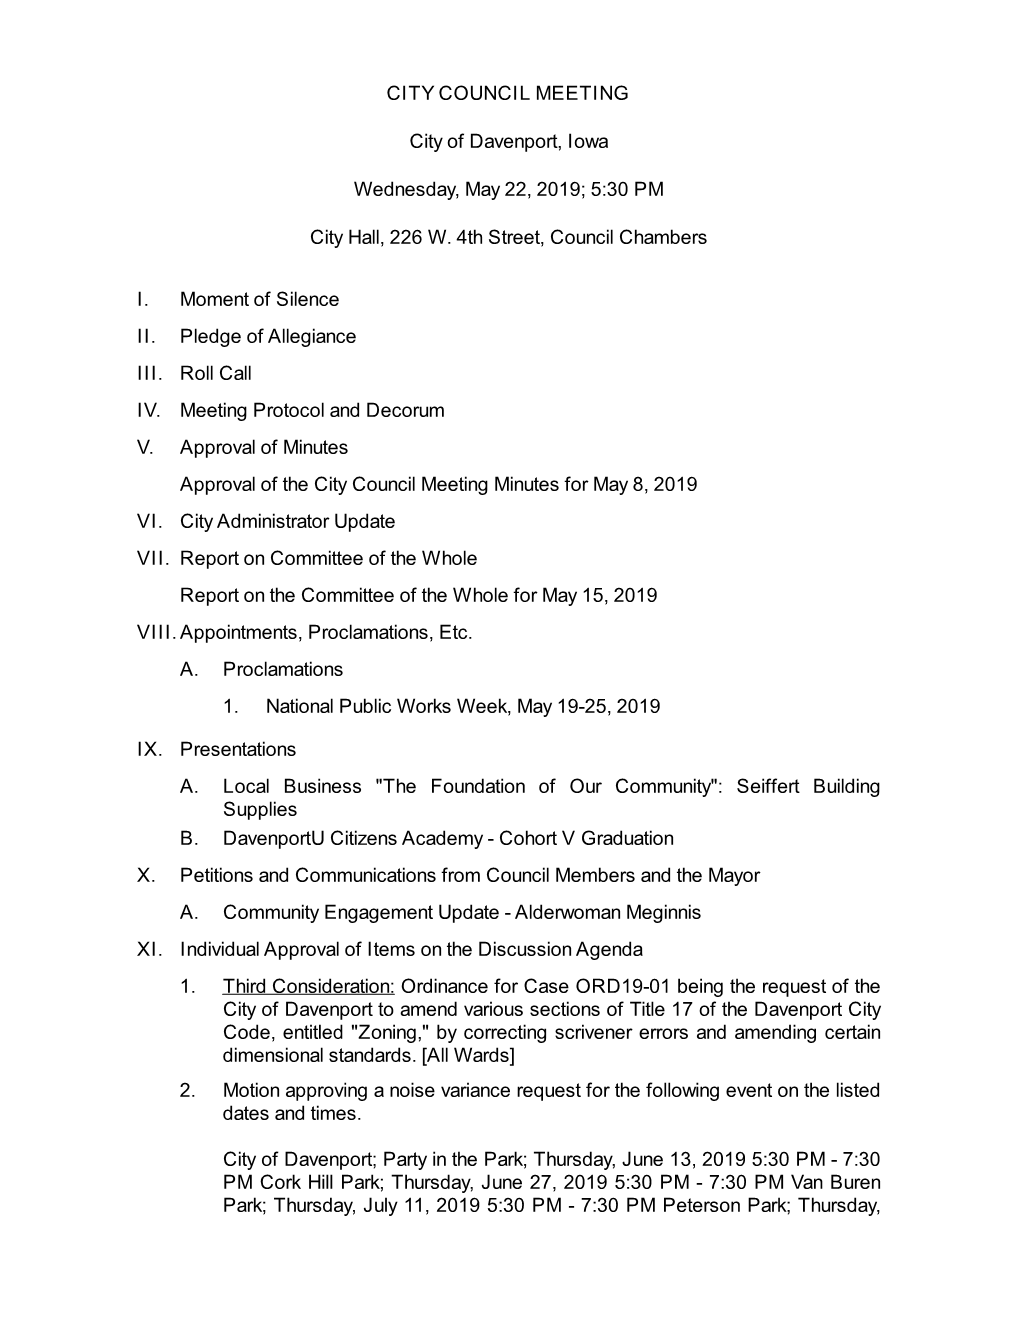 CITY COUNCIL MEETING City of Davenport, Iowa Wednesday, May